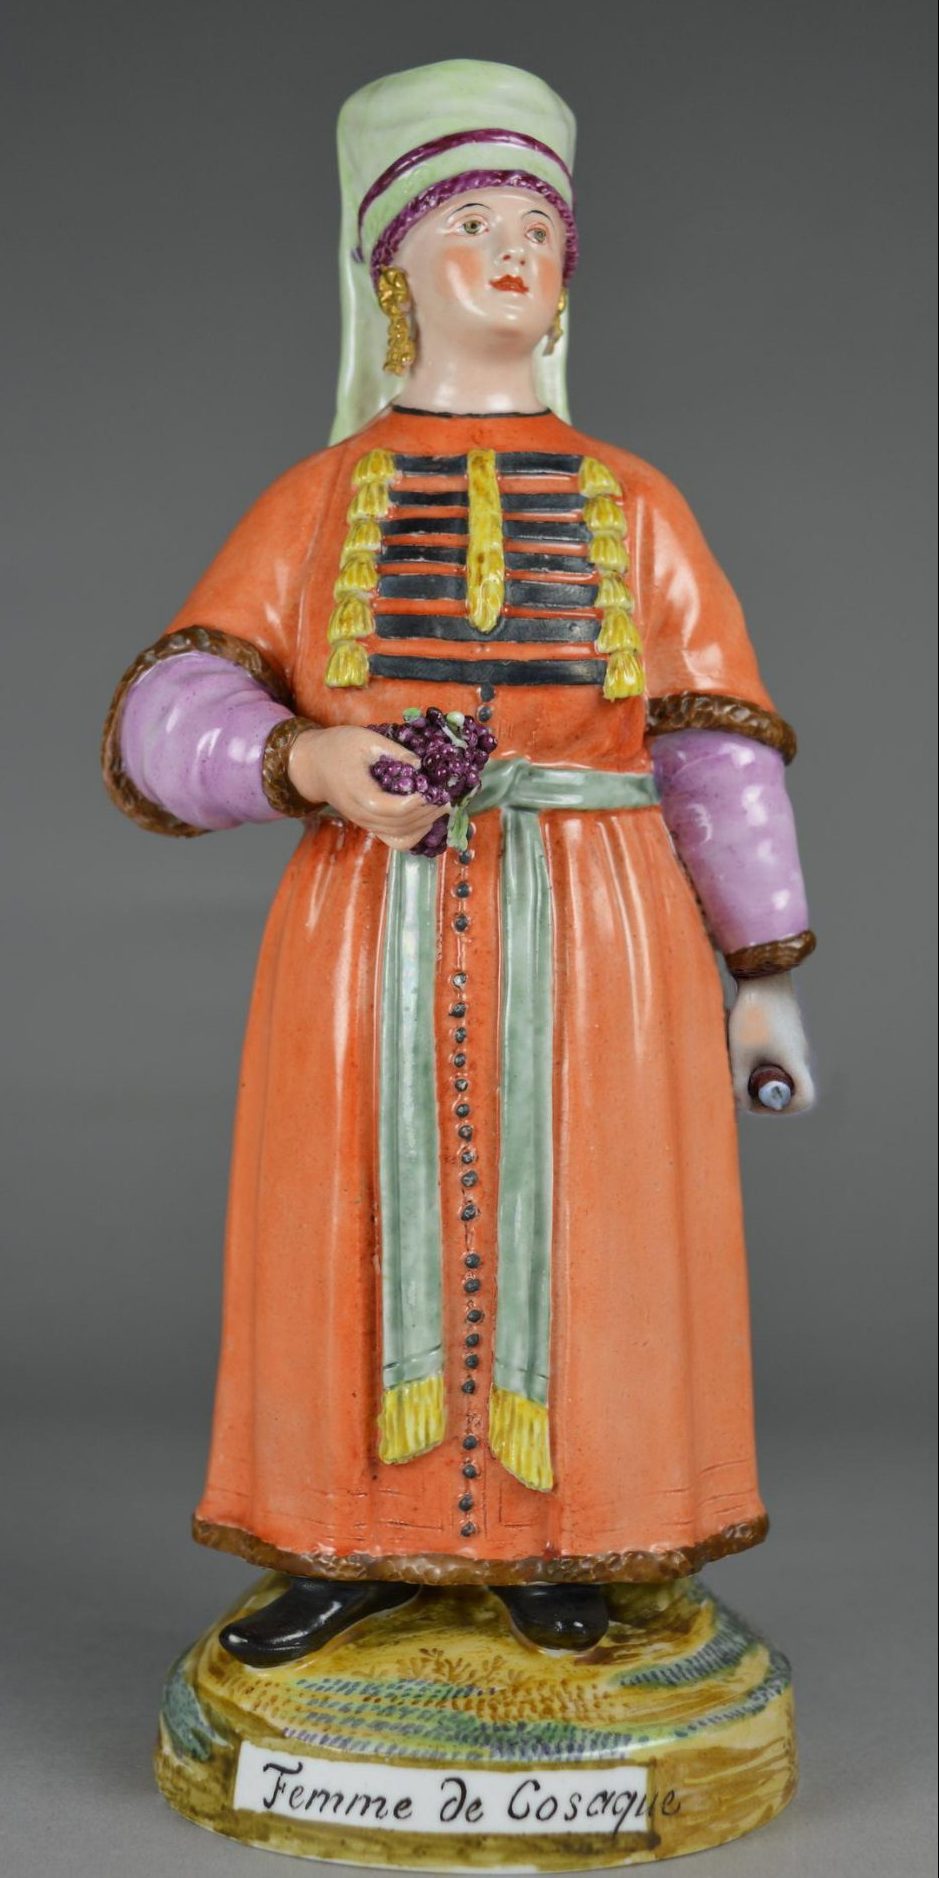 Russian Imperial Porcelain Factory figure of Cossack Woman from People of Russia series by Rachette. Gathering grapes. After engraving by Johann GÜLDENSTÄDT